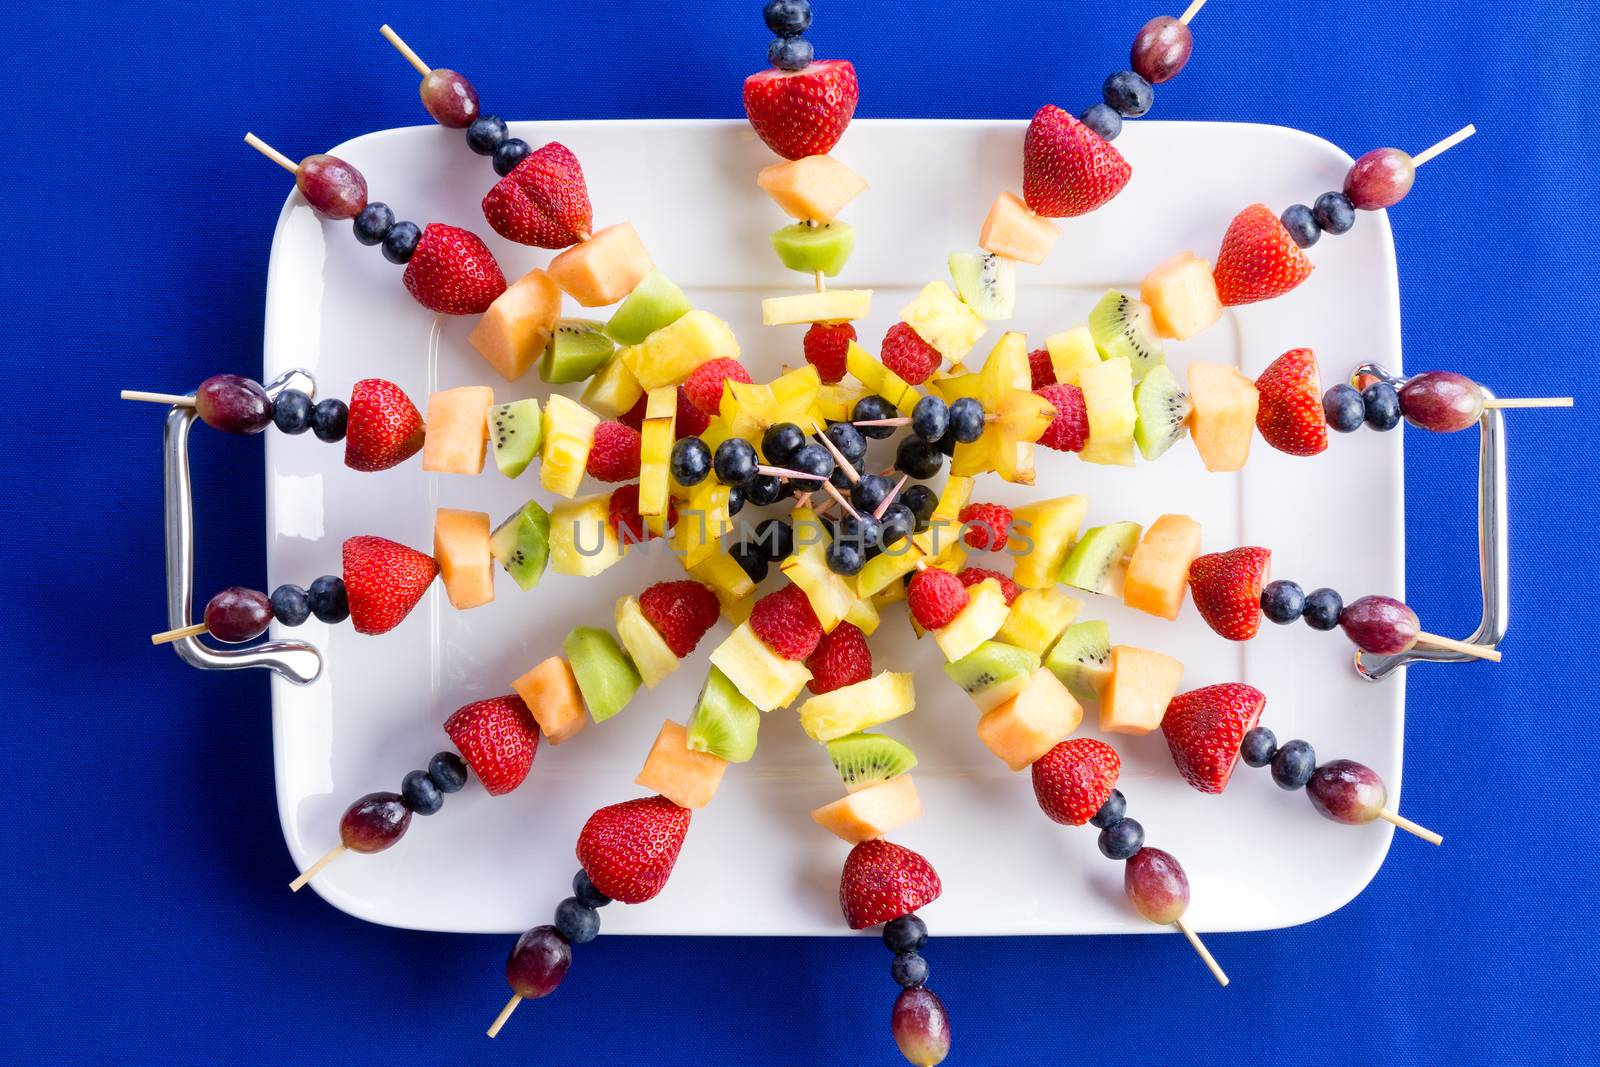 Colorful healthy fruit kebabs made with exotic and tropical fruit displayed in a radiating circle on a tray over a dark blue background, overhead view